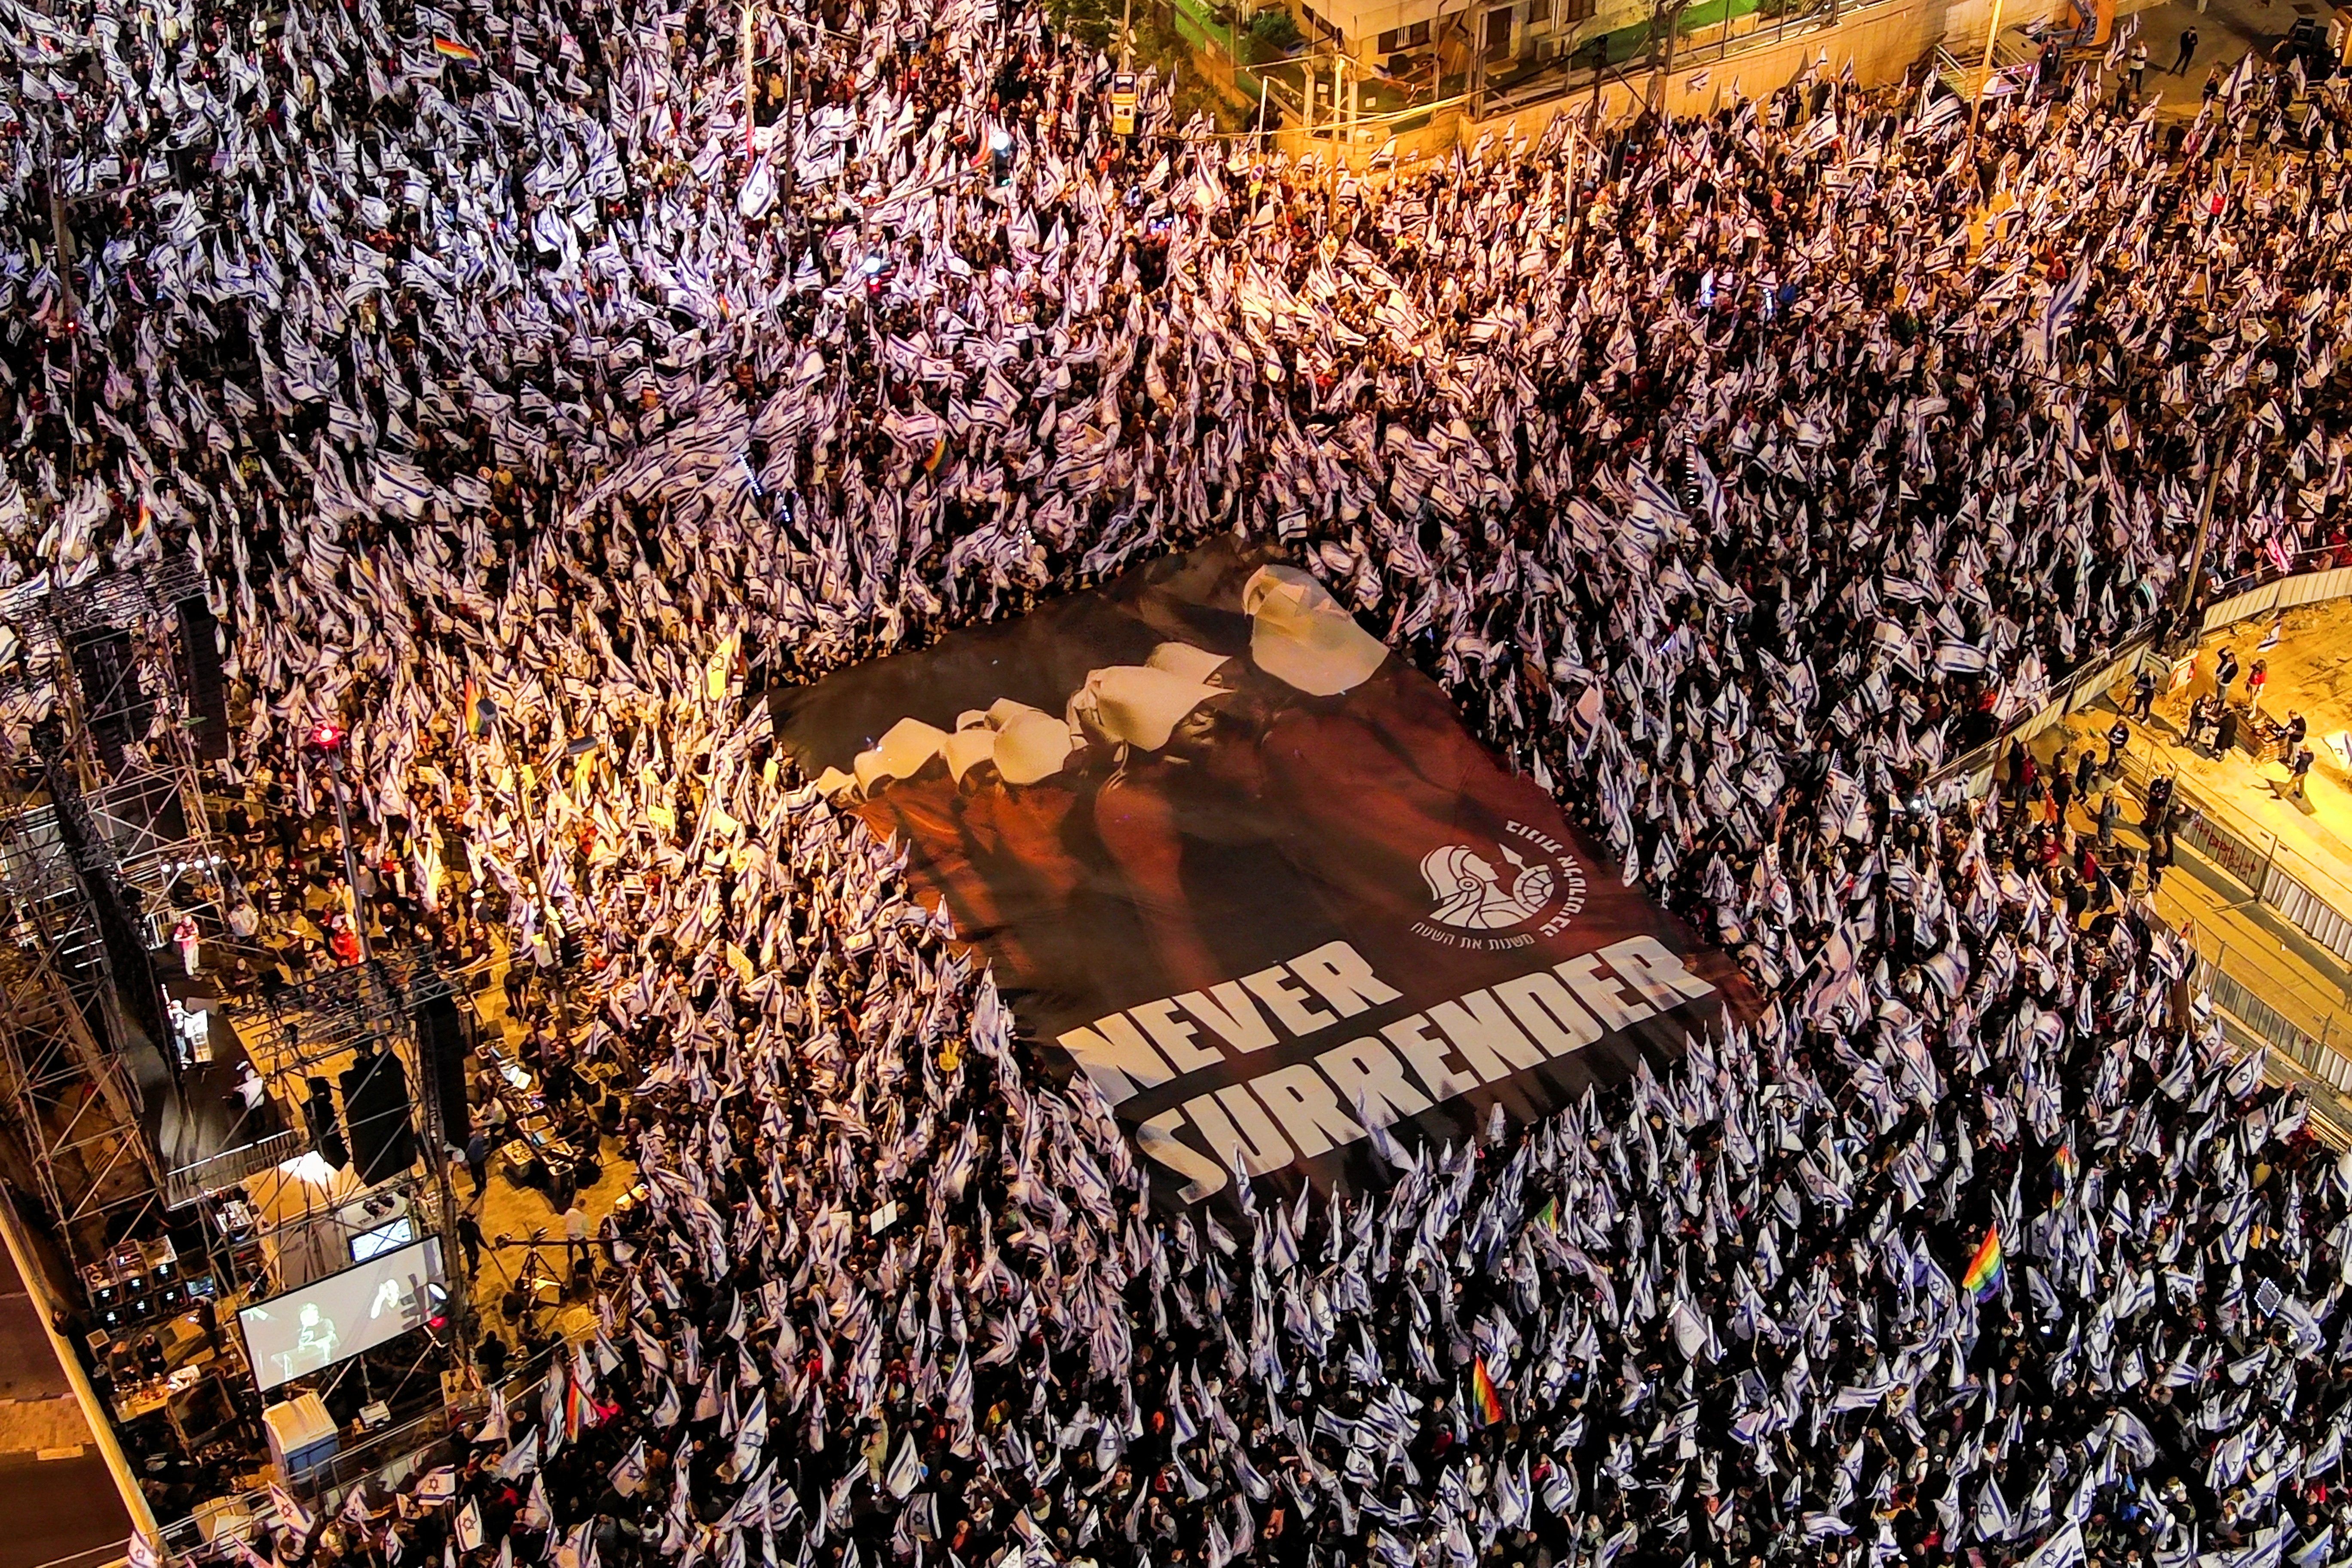 An aerial view shows protesters holding a sign depicting handmaidens from "The Handmaid's Tale" with the words "Never Surrender" as they demonstrate against Israeli PM Benjamin Netanyahu's judicial overhaul in Tel Aviv.